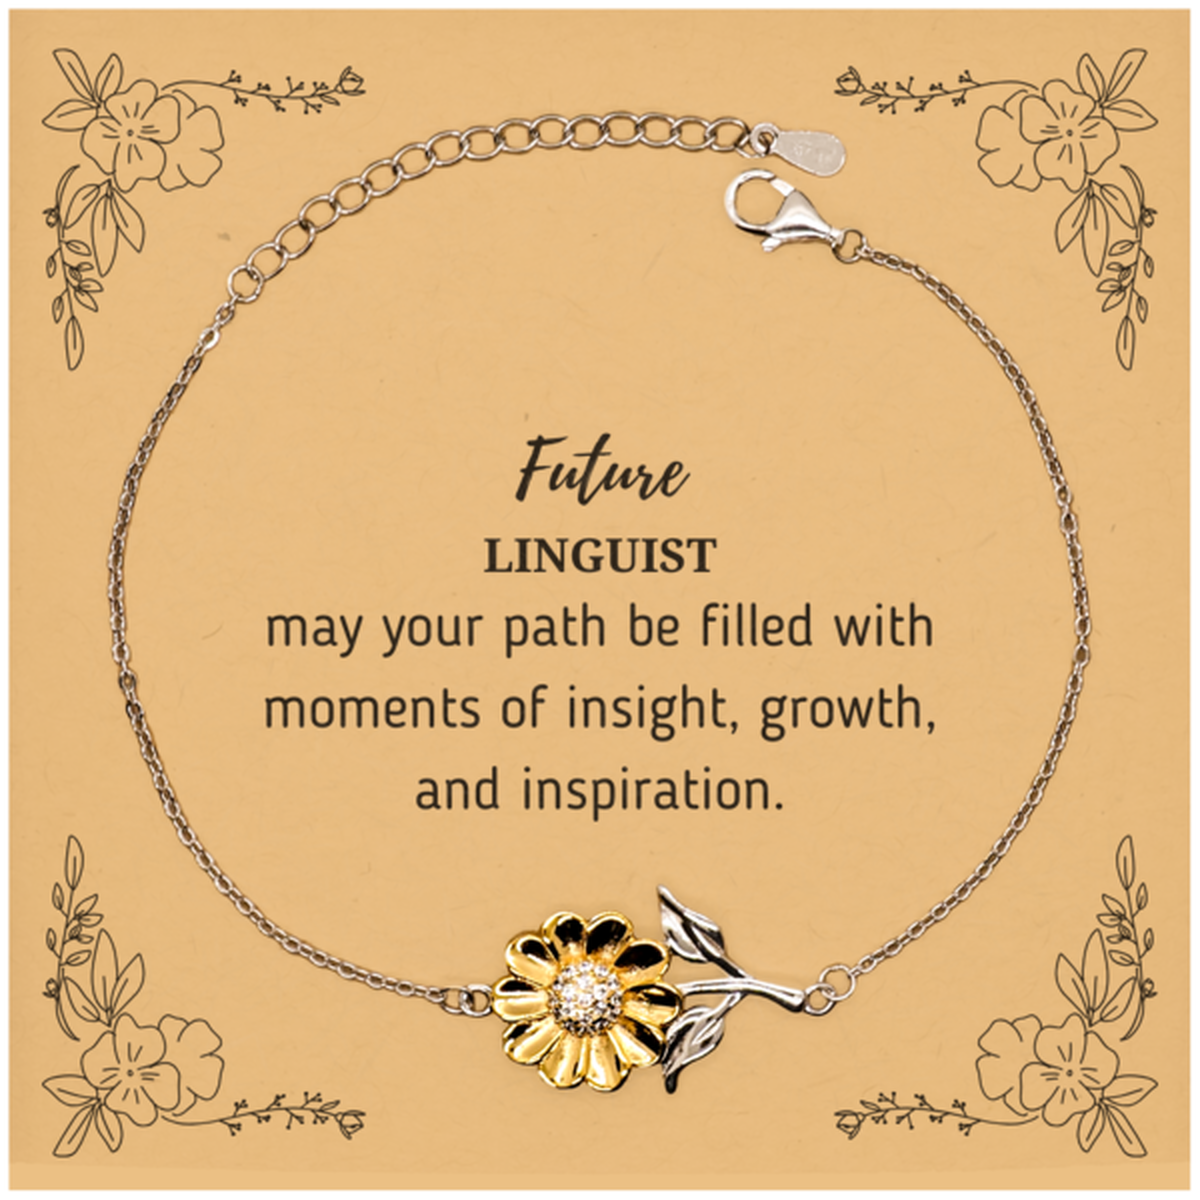 Future Linguist Gifts, May your path be filled with moments of insight, Graduation Gifts for New Linguist, Christmas Unique Sunflower Bracelet For Men, Women, Friends